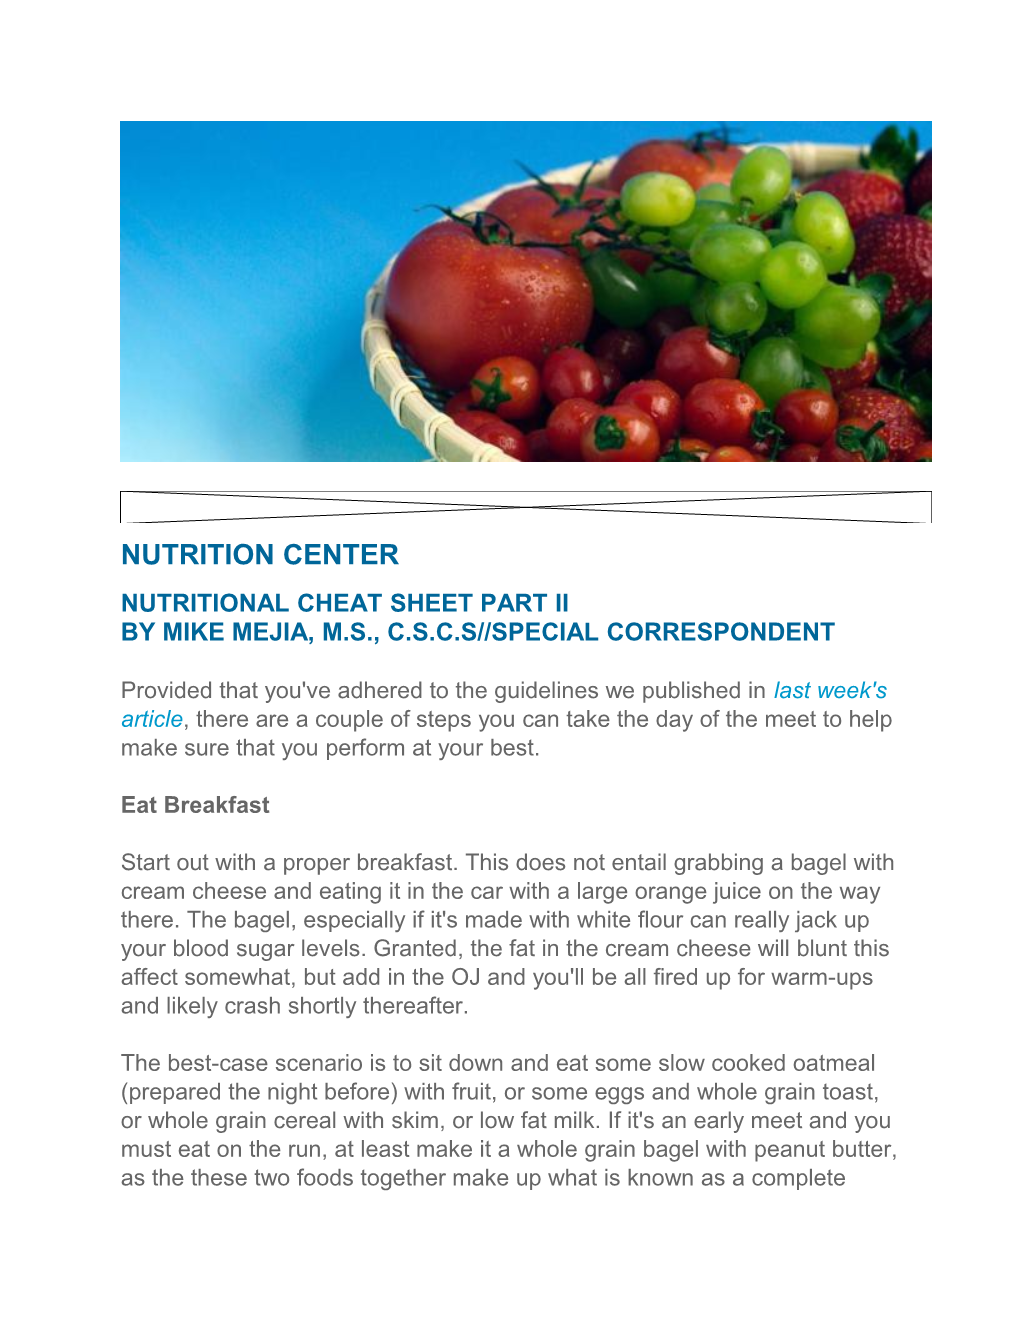 Nutritional Cheat Sheet PART Ii by MIKE MEJIA, M.S., C.S.C.S Special Correspondent